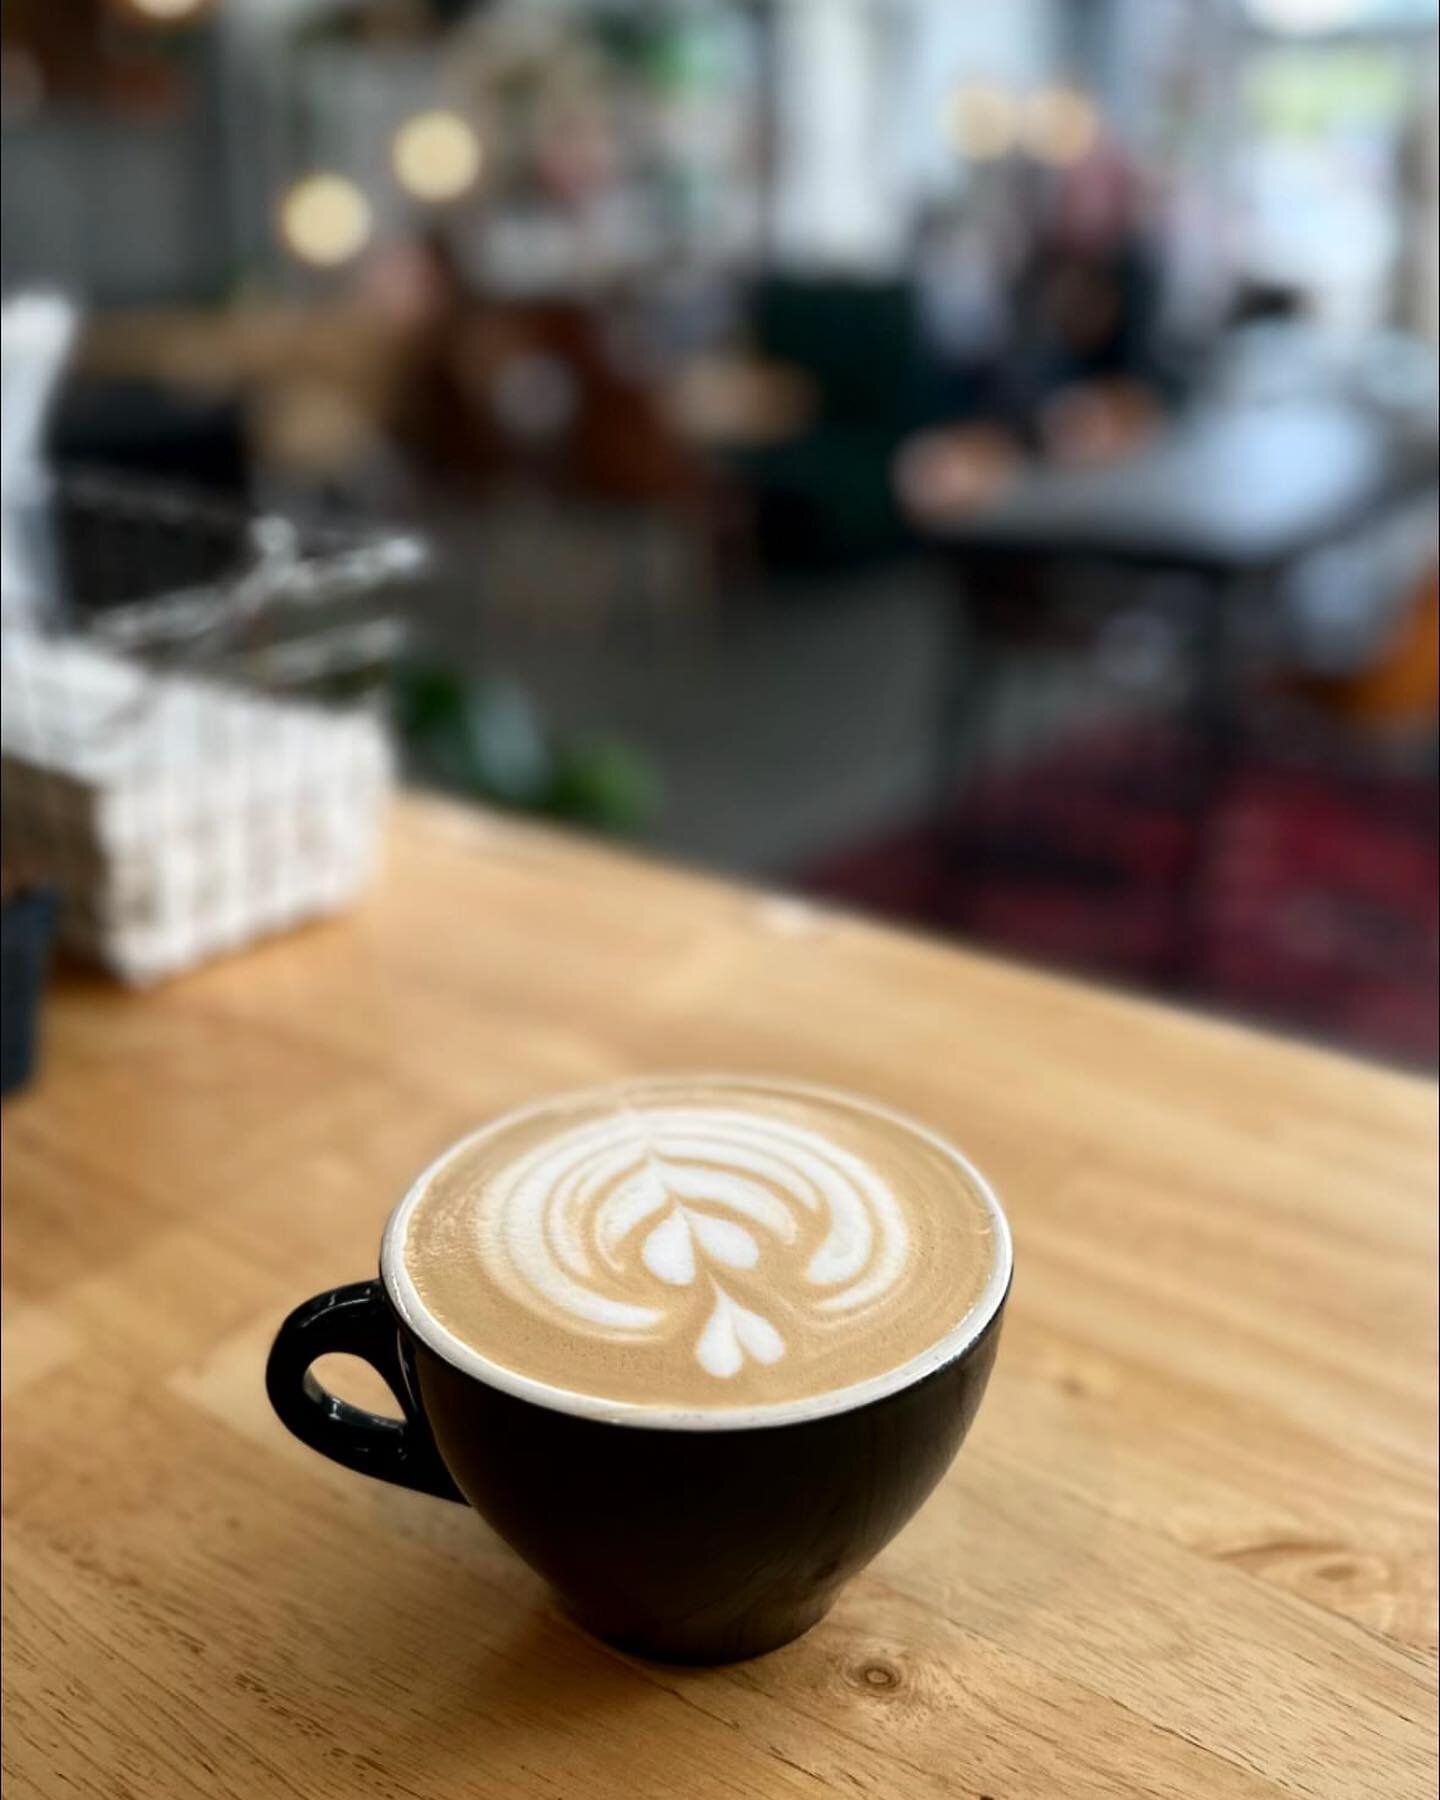 Happy Tuesday coffee loving friends! We&rsquo;d love the opportunity to see you and help give you that little extra positive push for your day! ☕️ Stop by today and see us! Not local? That&rsquo;s ok - plan a vacation to see us in beautiful Beaufort 